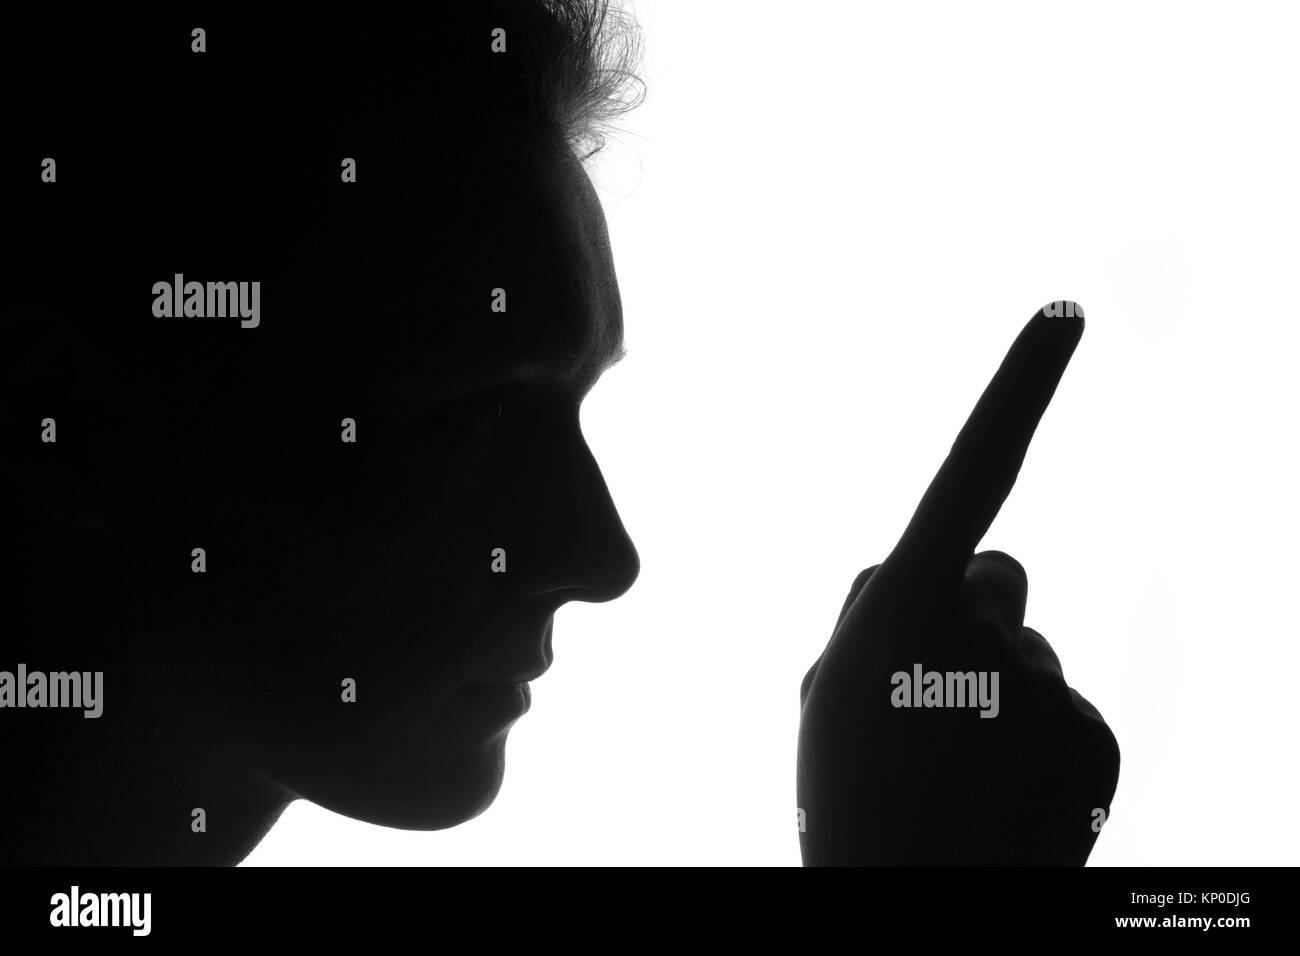 silhouette of a hand person in profile with a finger pointing up on a white background. Think concept or pointing do or idea or forward concepts Stock Photo